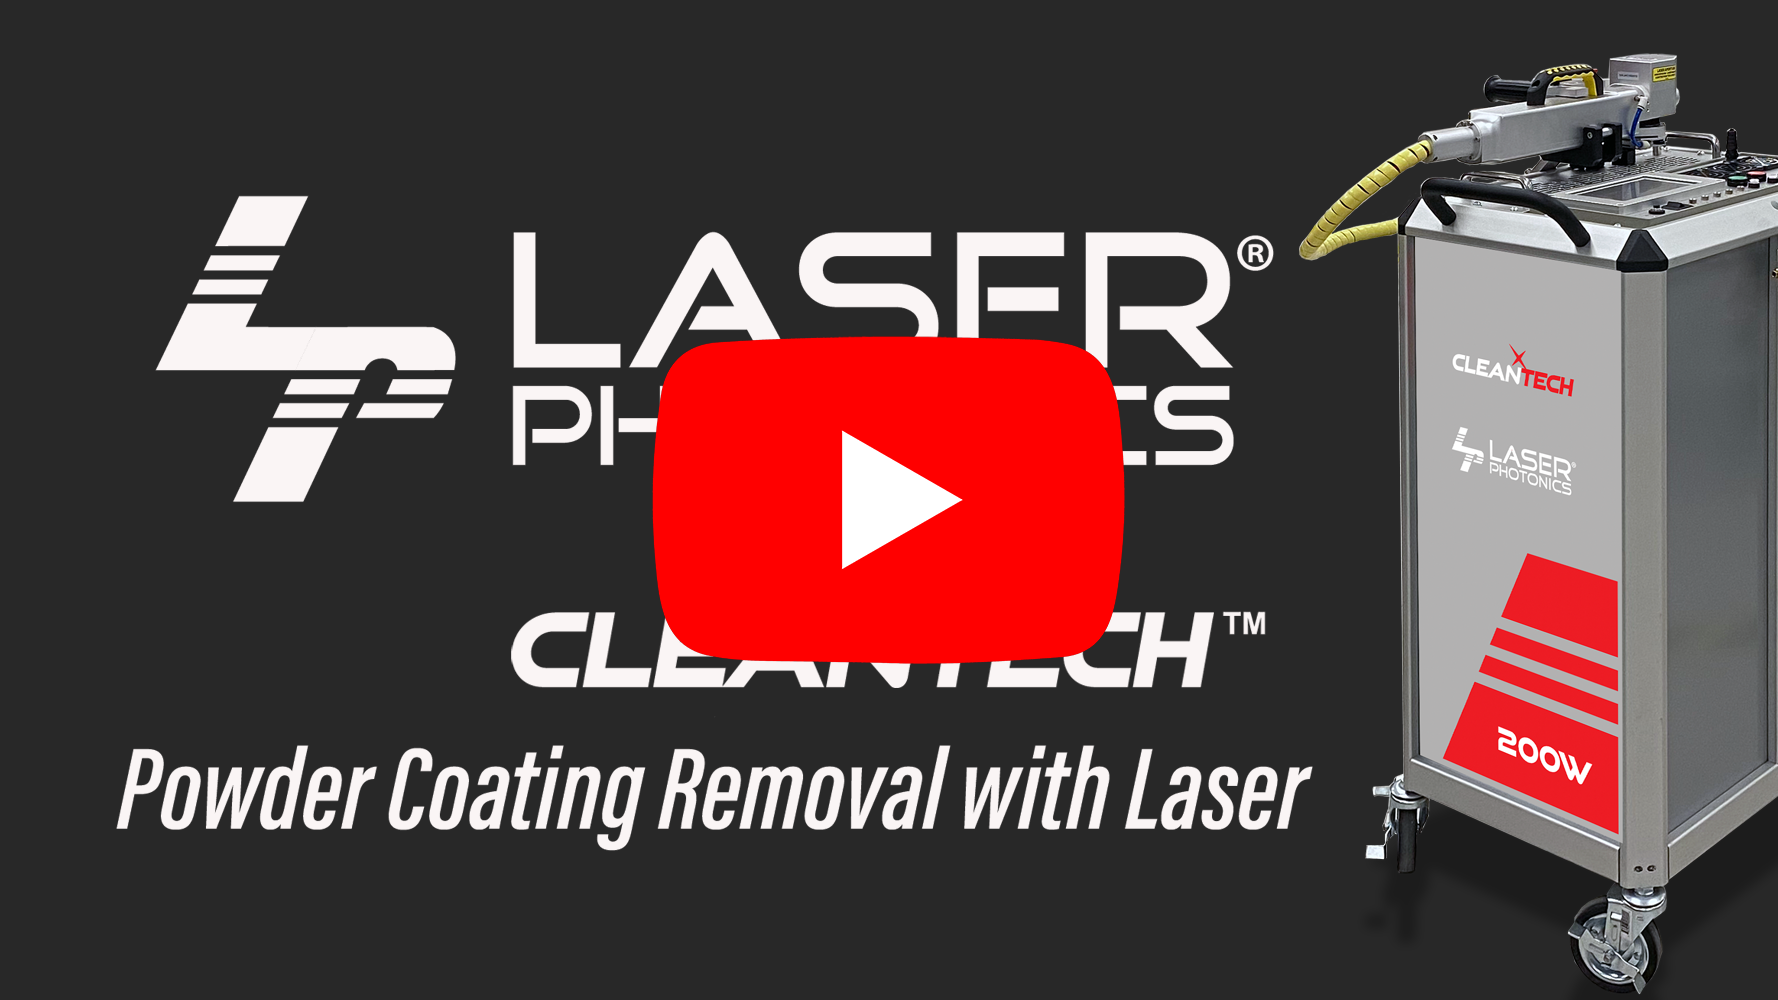 Click to play video demonstrating CleanTech laser removing powder coating from steel plate